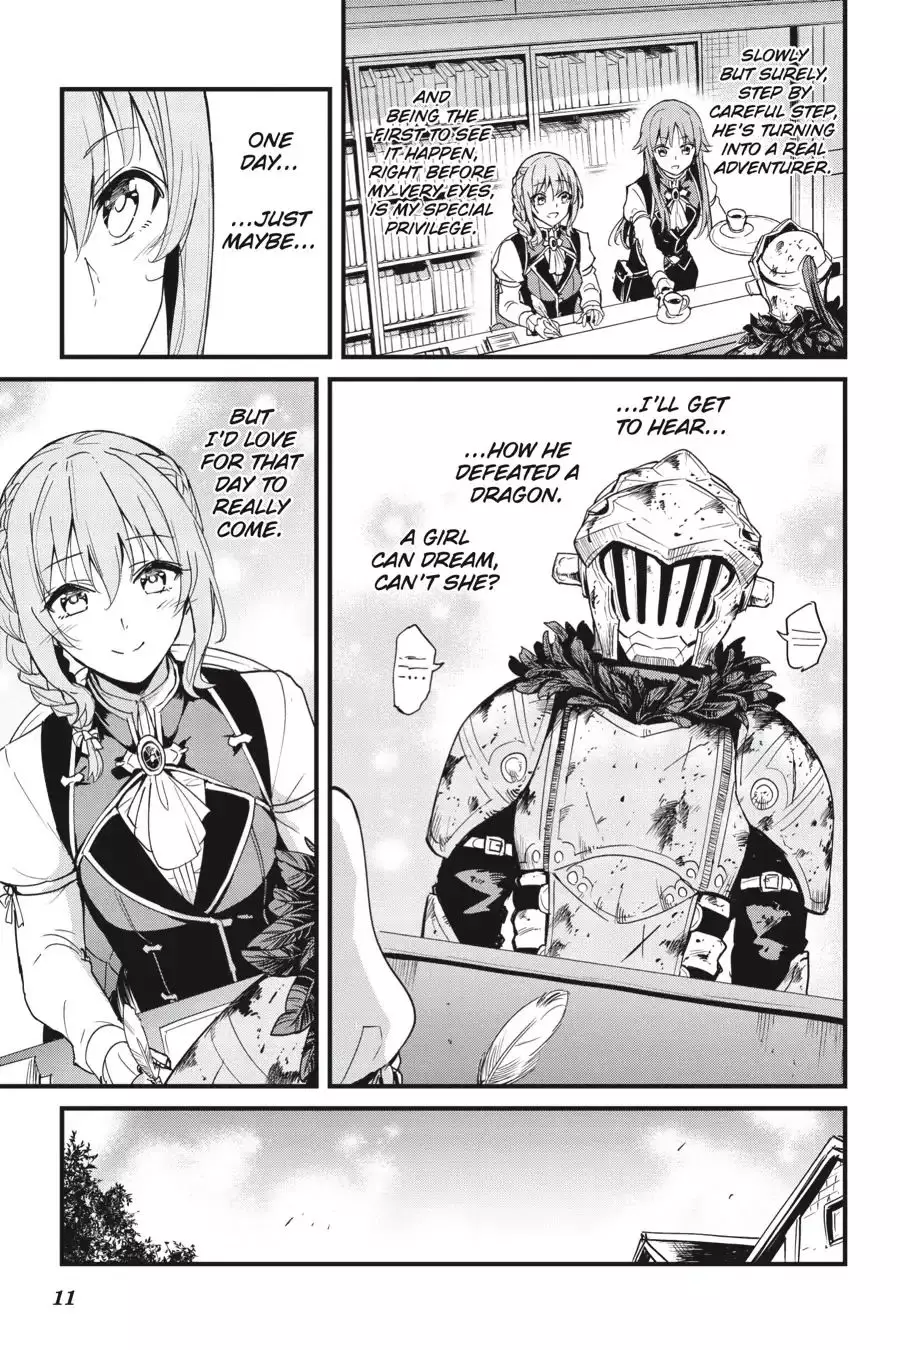 Goblin Slayer: Side Story Year One - 78 page 12-8f7368ac